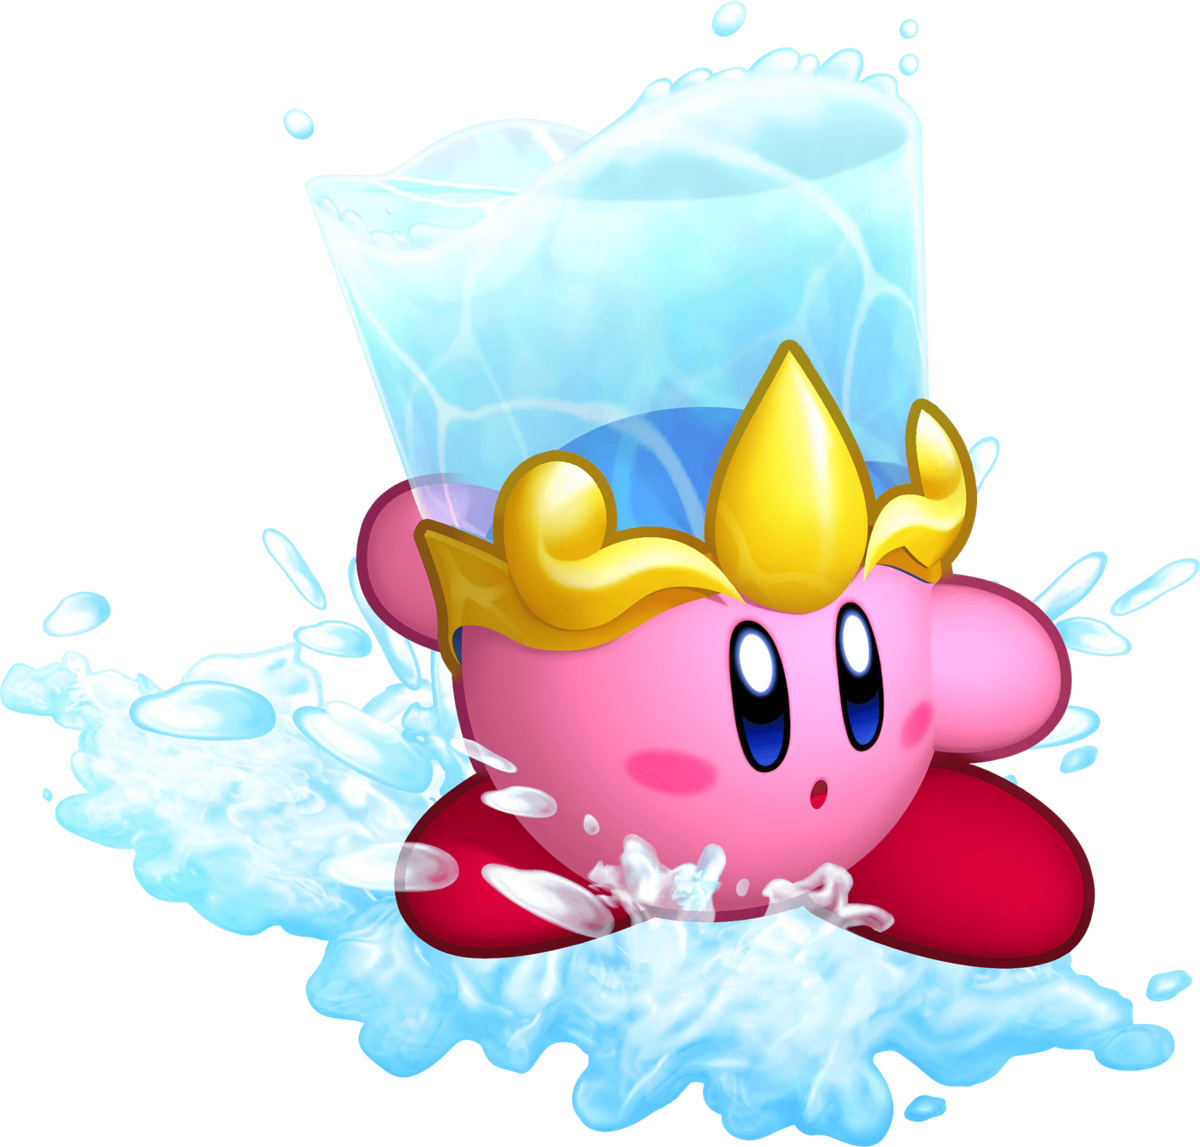 Kirby's Return to Dream Land Deluxe - WiKirby: it's a wiki, about Kirby!